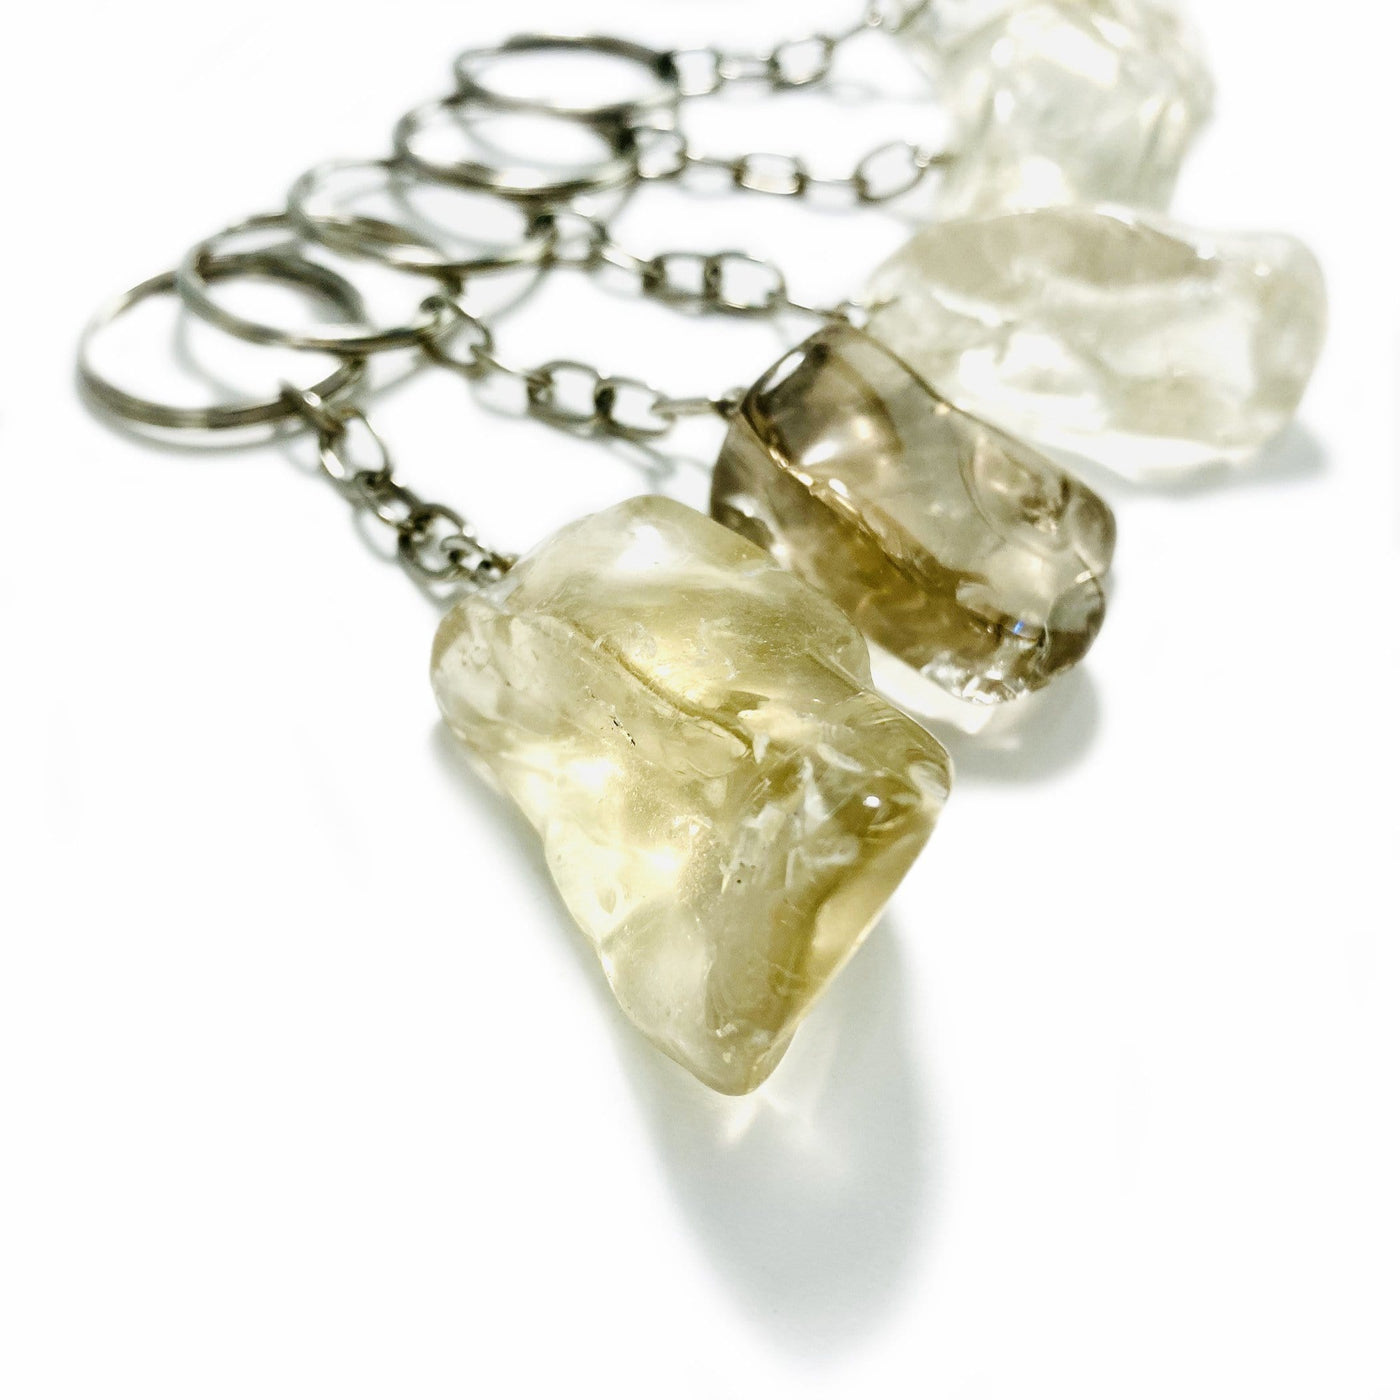 Close up of silver plated citrine key chains on a white background